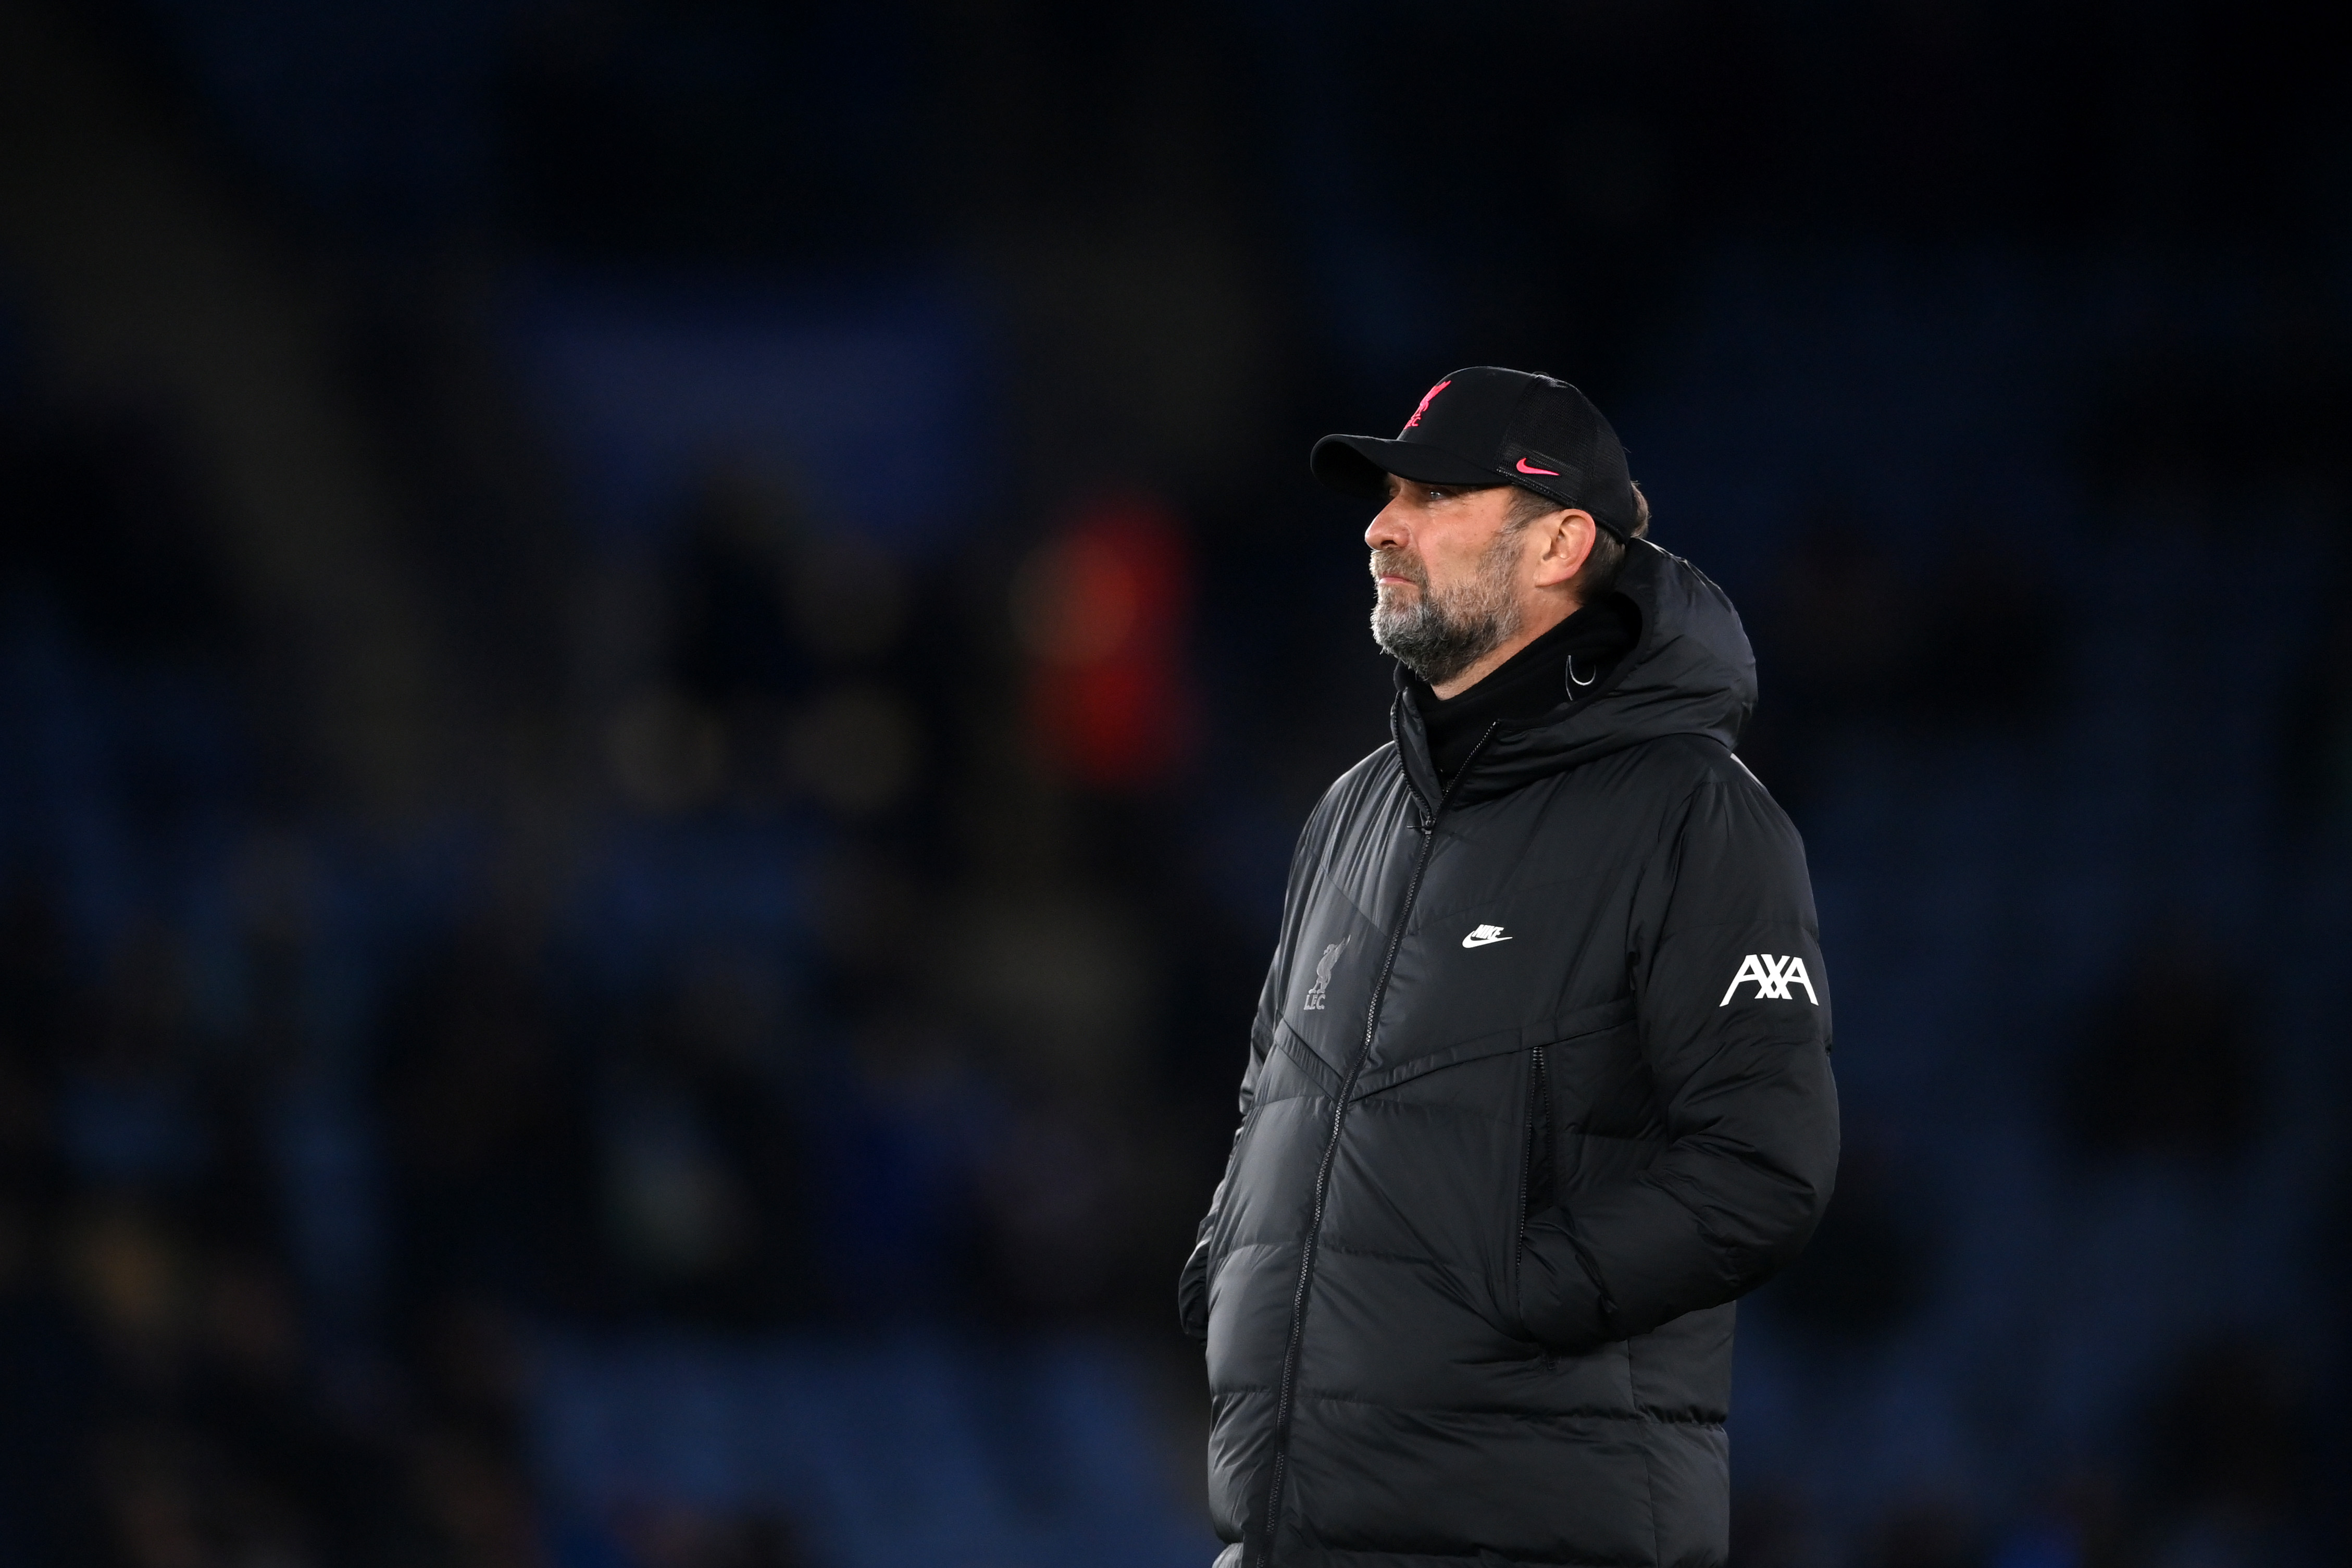 ‘We have to learn and we will’ – Jurgen Klopp reacts to a damaging defeat for Liverpool at Leicester